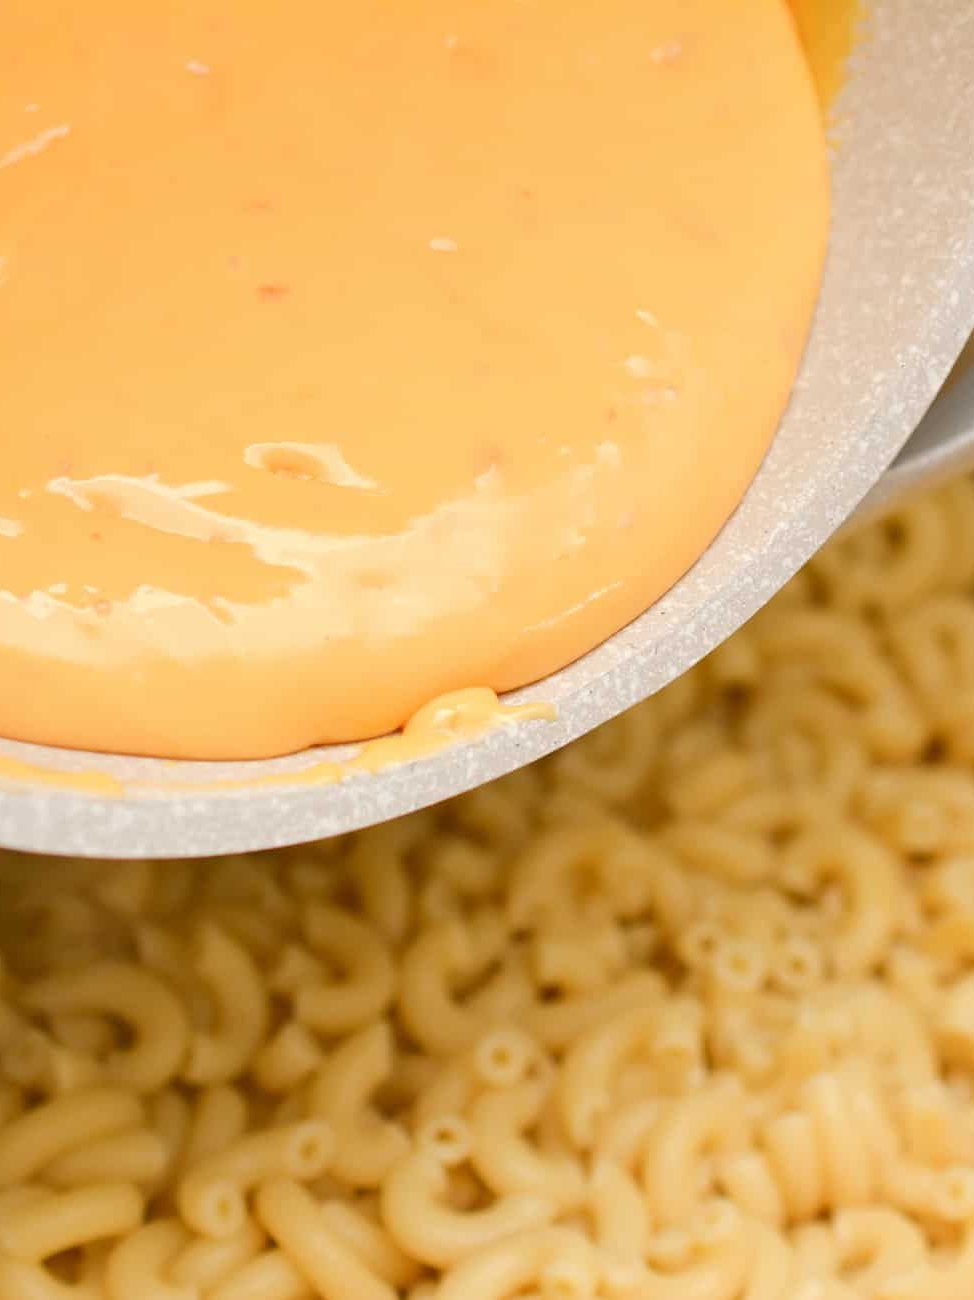 Pour the cheese sauce over the macaroni and stir to combine.